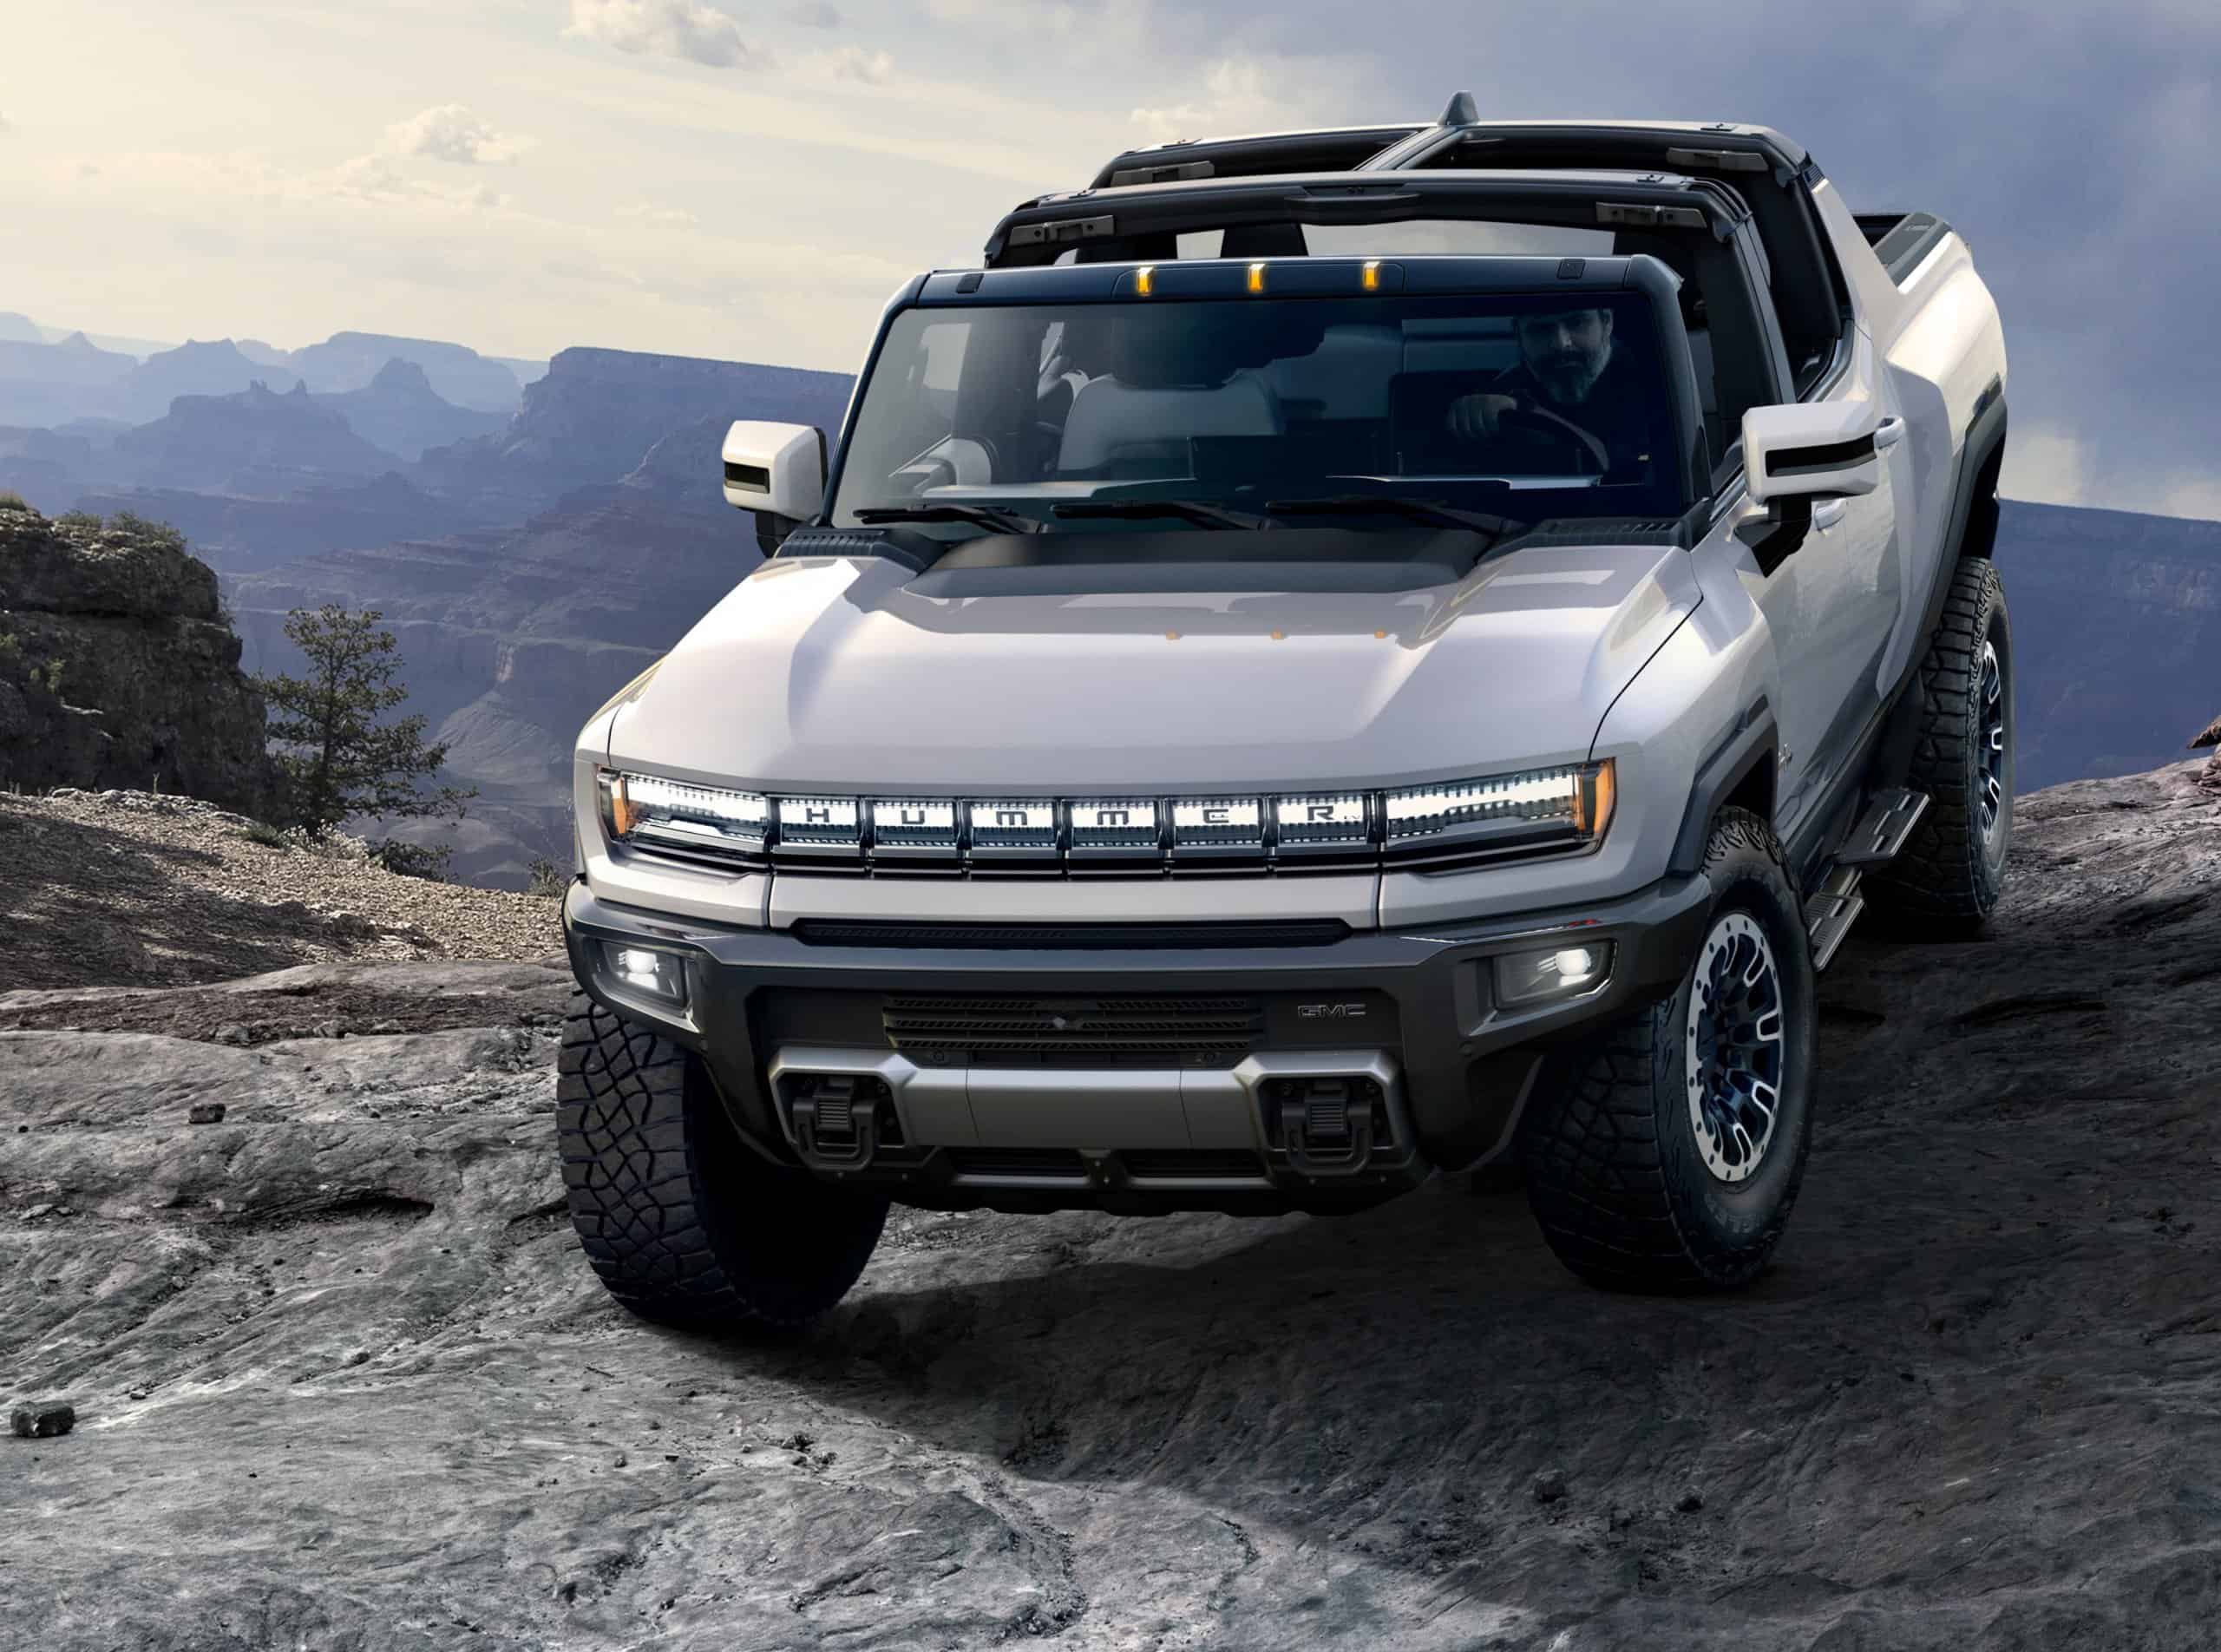 GMC unveils electric Hummer pickup truck The